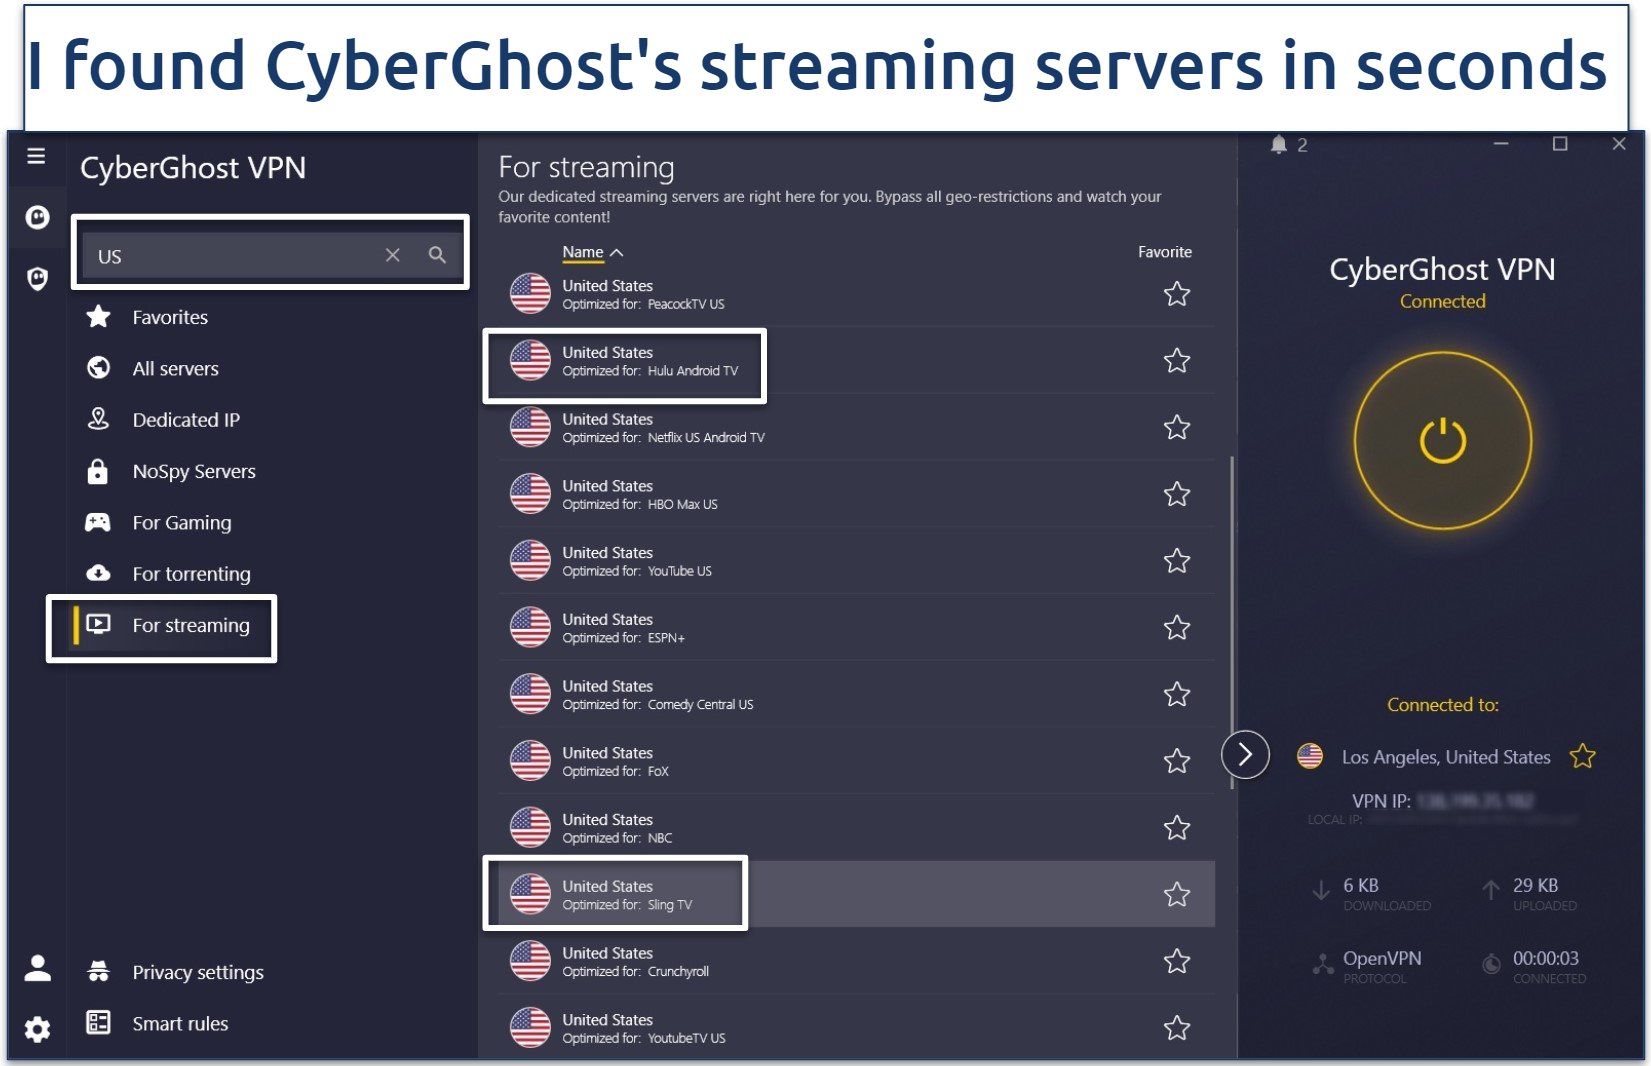 A screenshot of the CyberGhost app dashboard showing its US streaming servers with Hulu Sling TV, and YouTube TV servers highlighted.